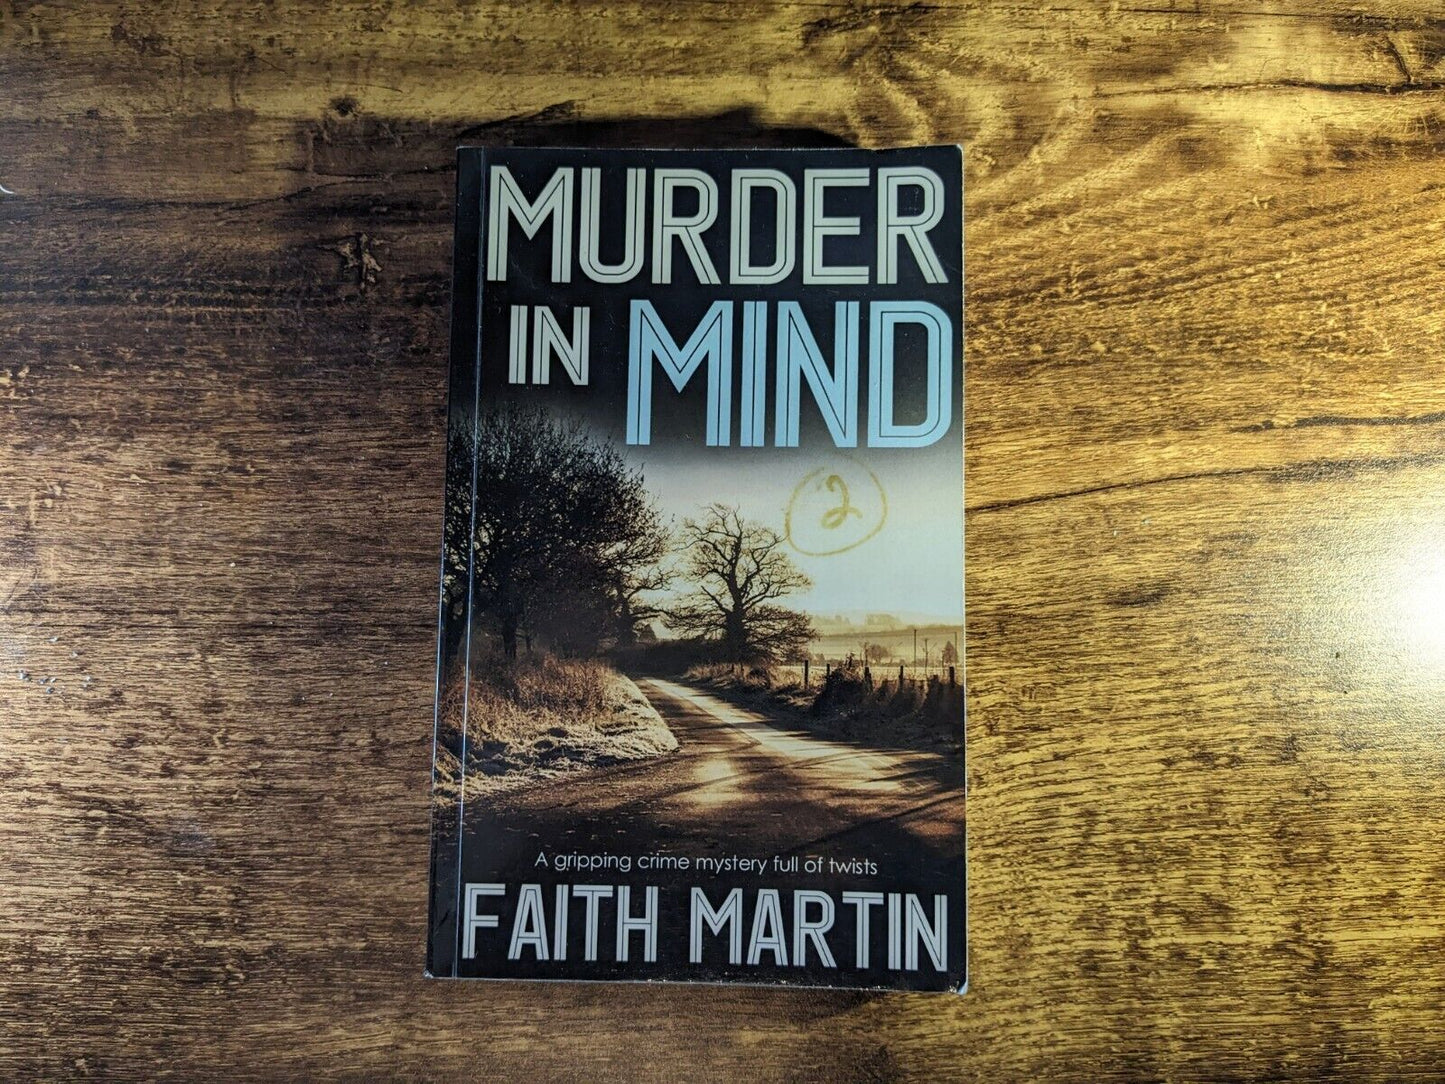 MURDER IN MIND a gripping crime mystery full of twists paperback by Faith Martin (Hillary Greene #16) - Asylum Books